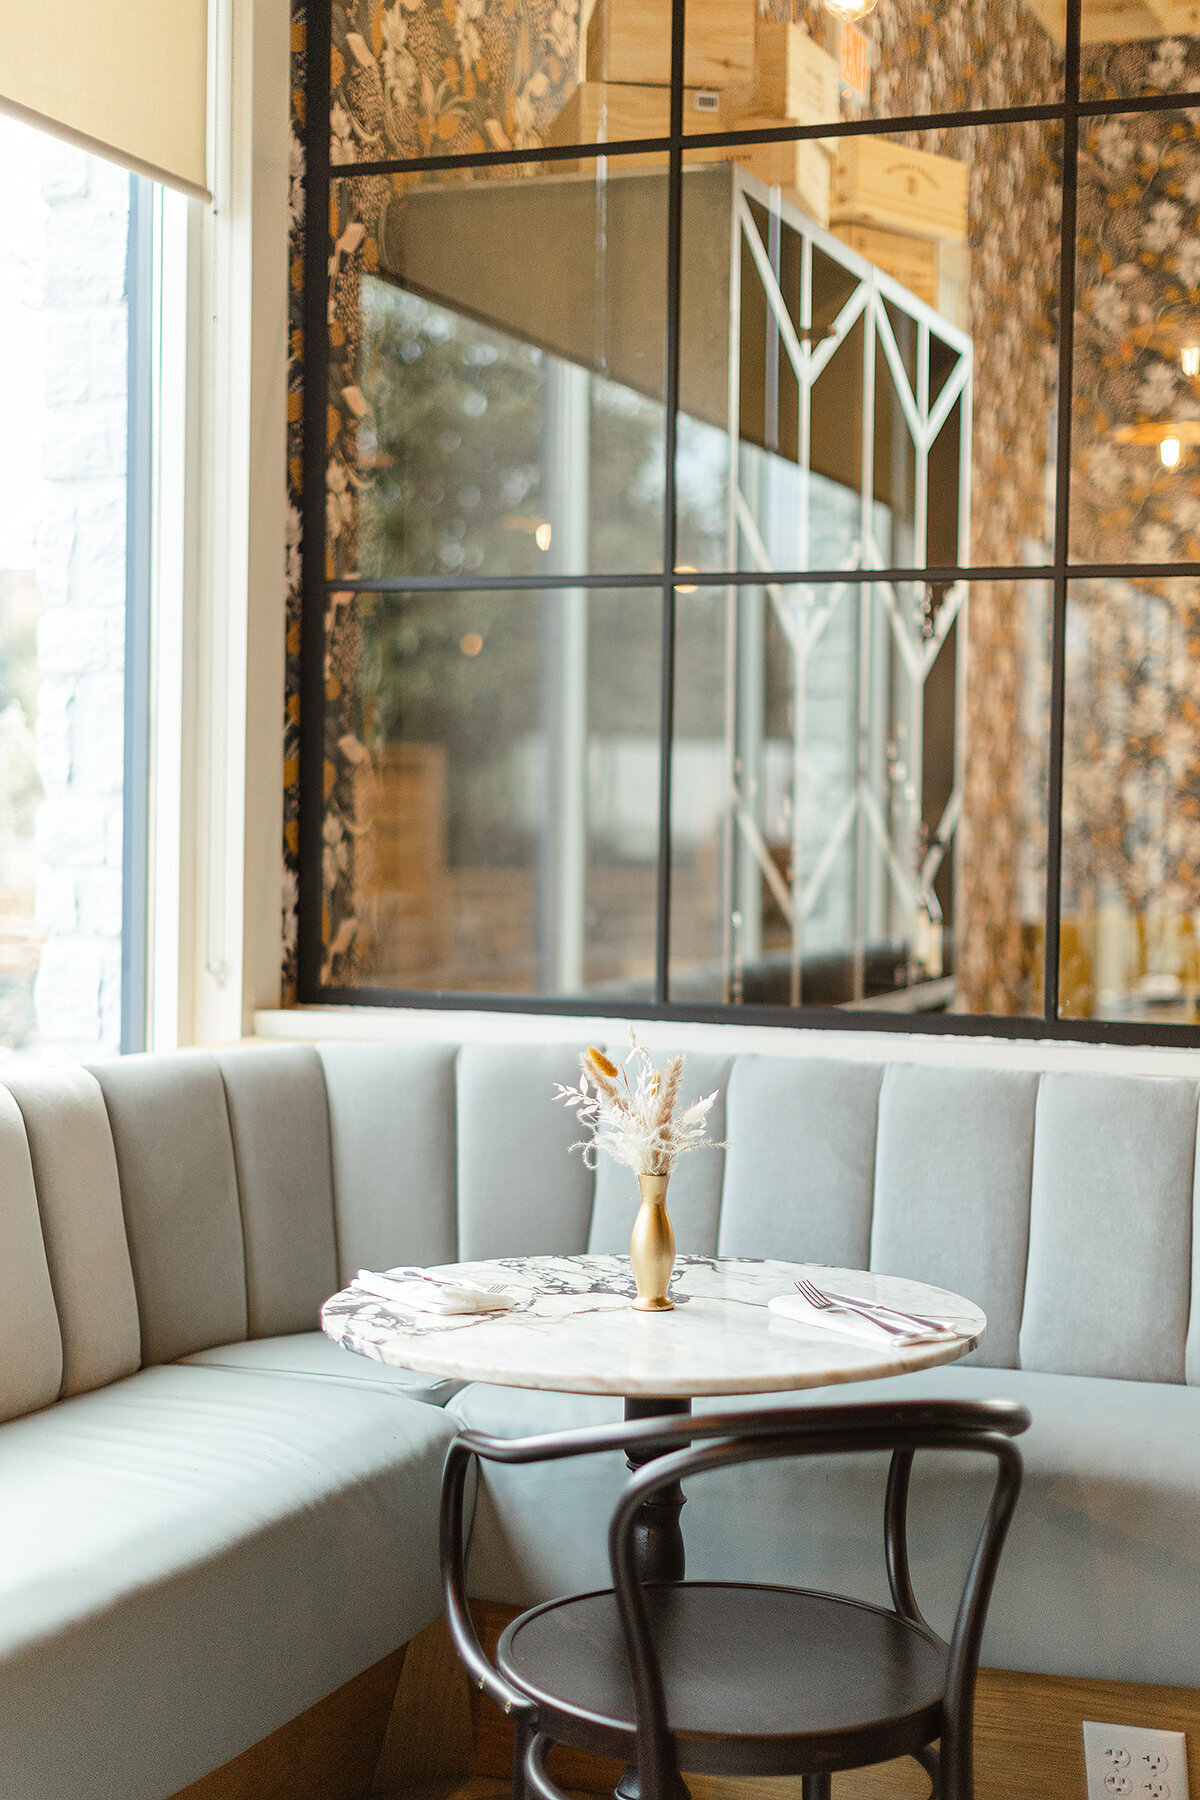 Beautiful interior photo of the new Sip and Savor restaurant in Highland Village.